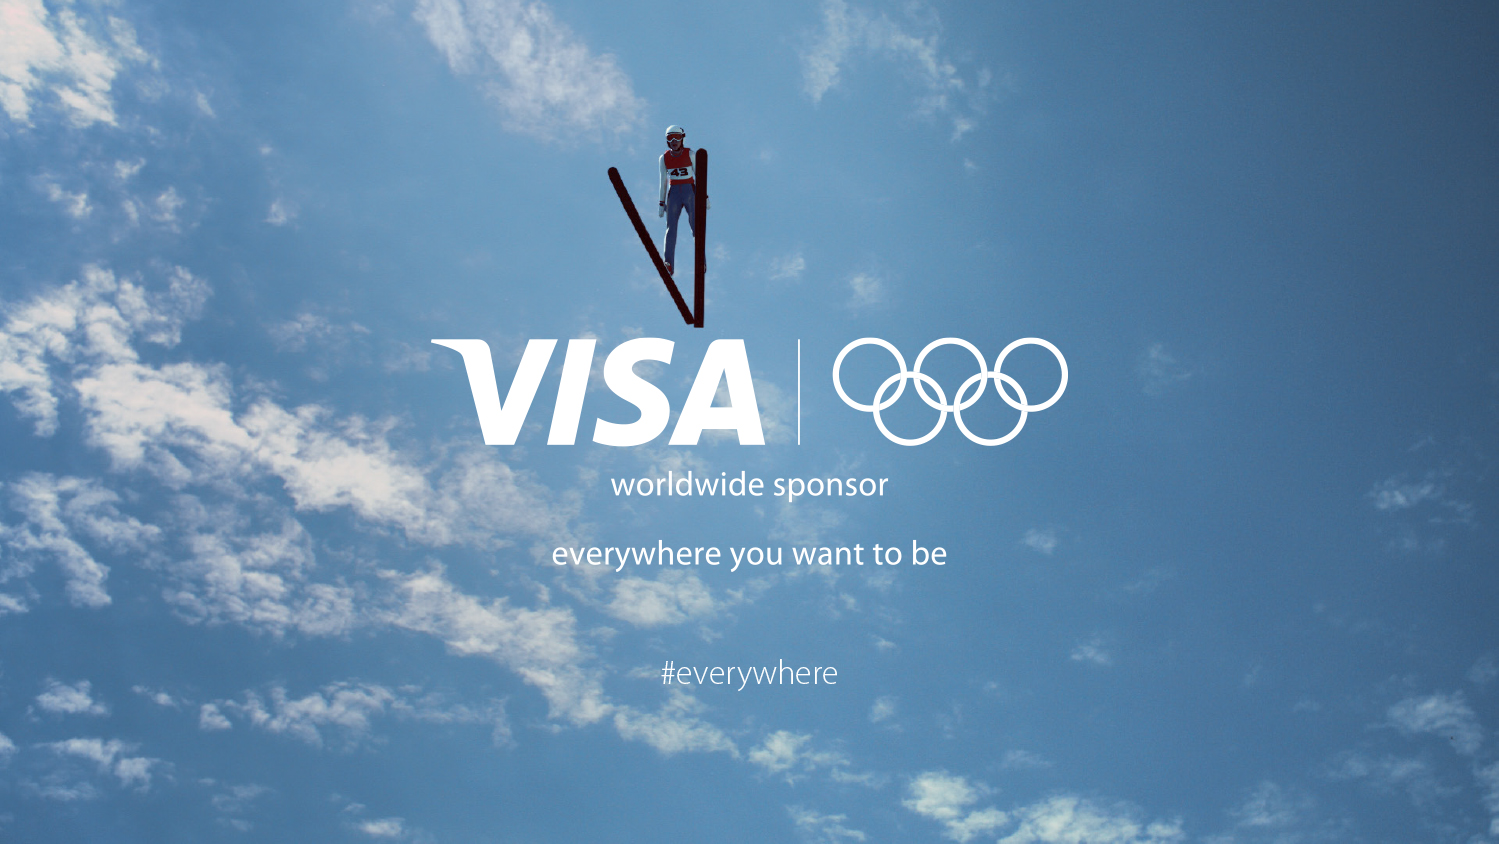 Skier mid jump in the air from below with the Visa and Olympics logo overlaid.